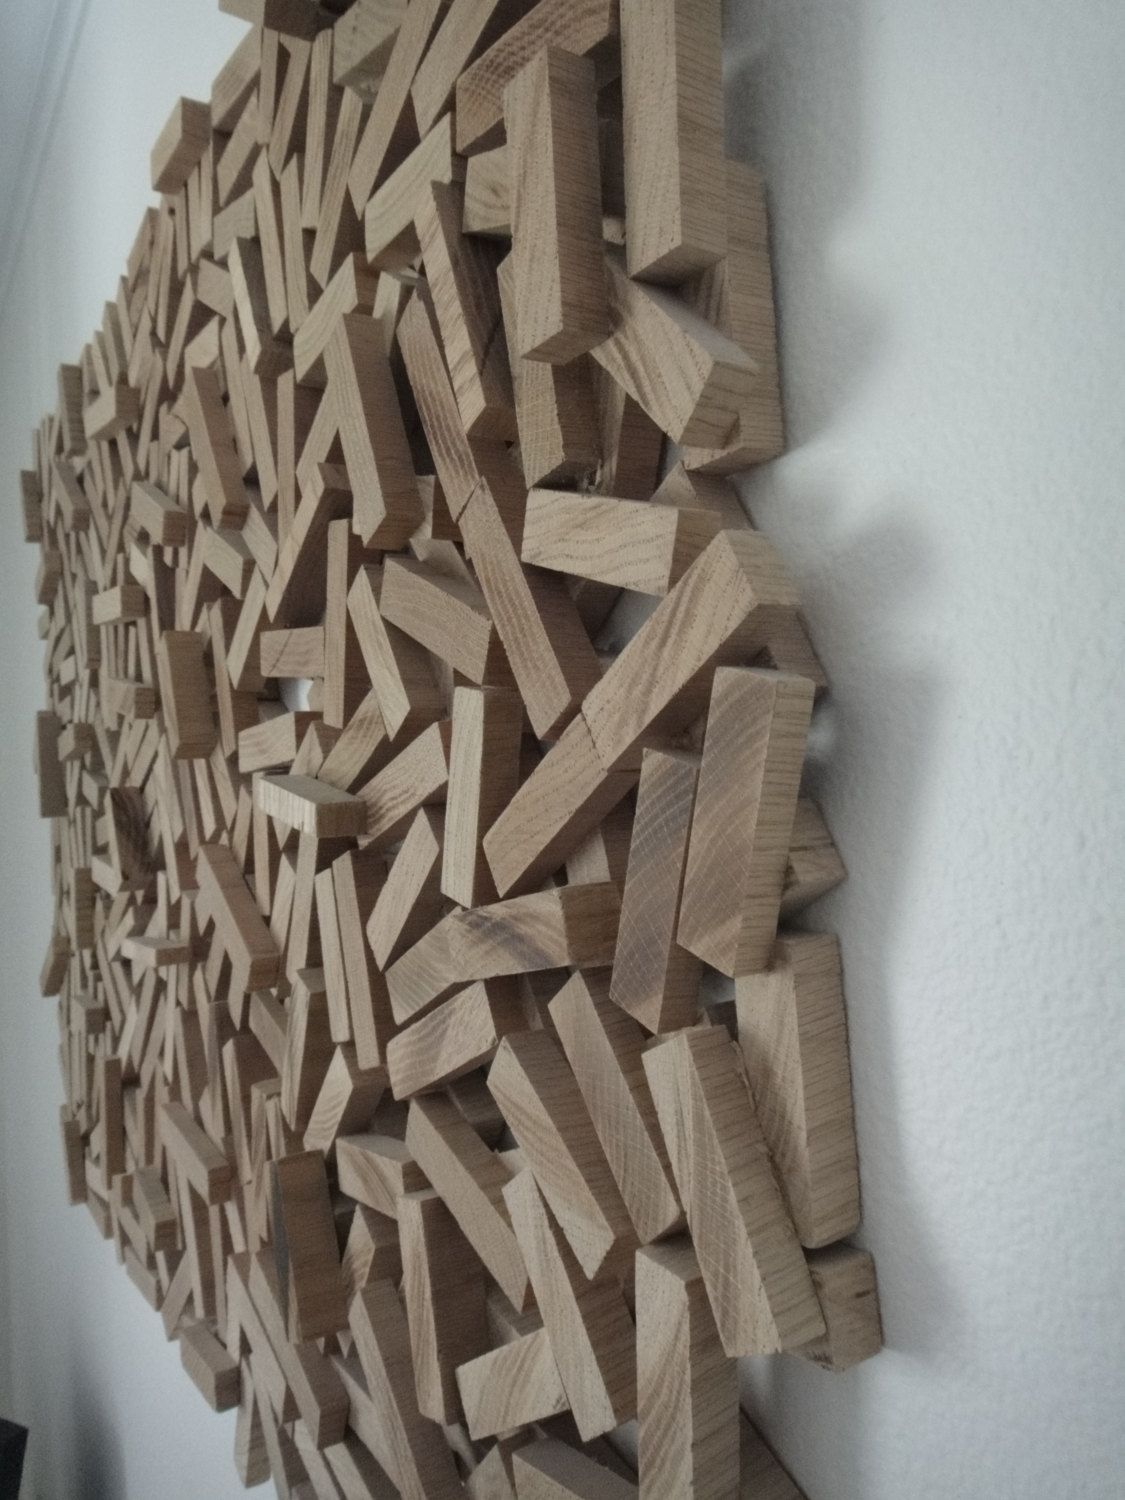 Abstract Wood Sculpture Wall Hanging Wood Wall Art – Etsy | Wood Wall Art,  Wood Sculpture, Wood Wall Sculpture Throughout Abstract Wood Wall Art (View 2 of 15)